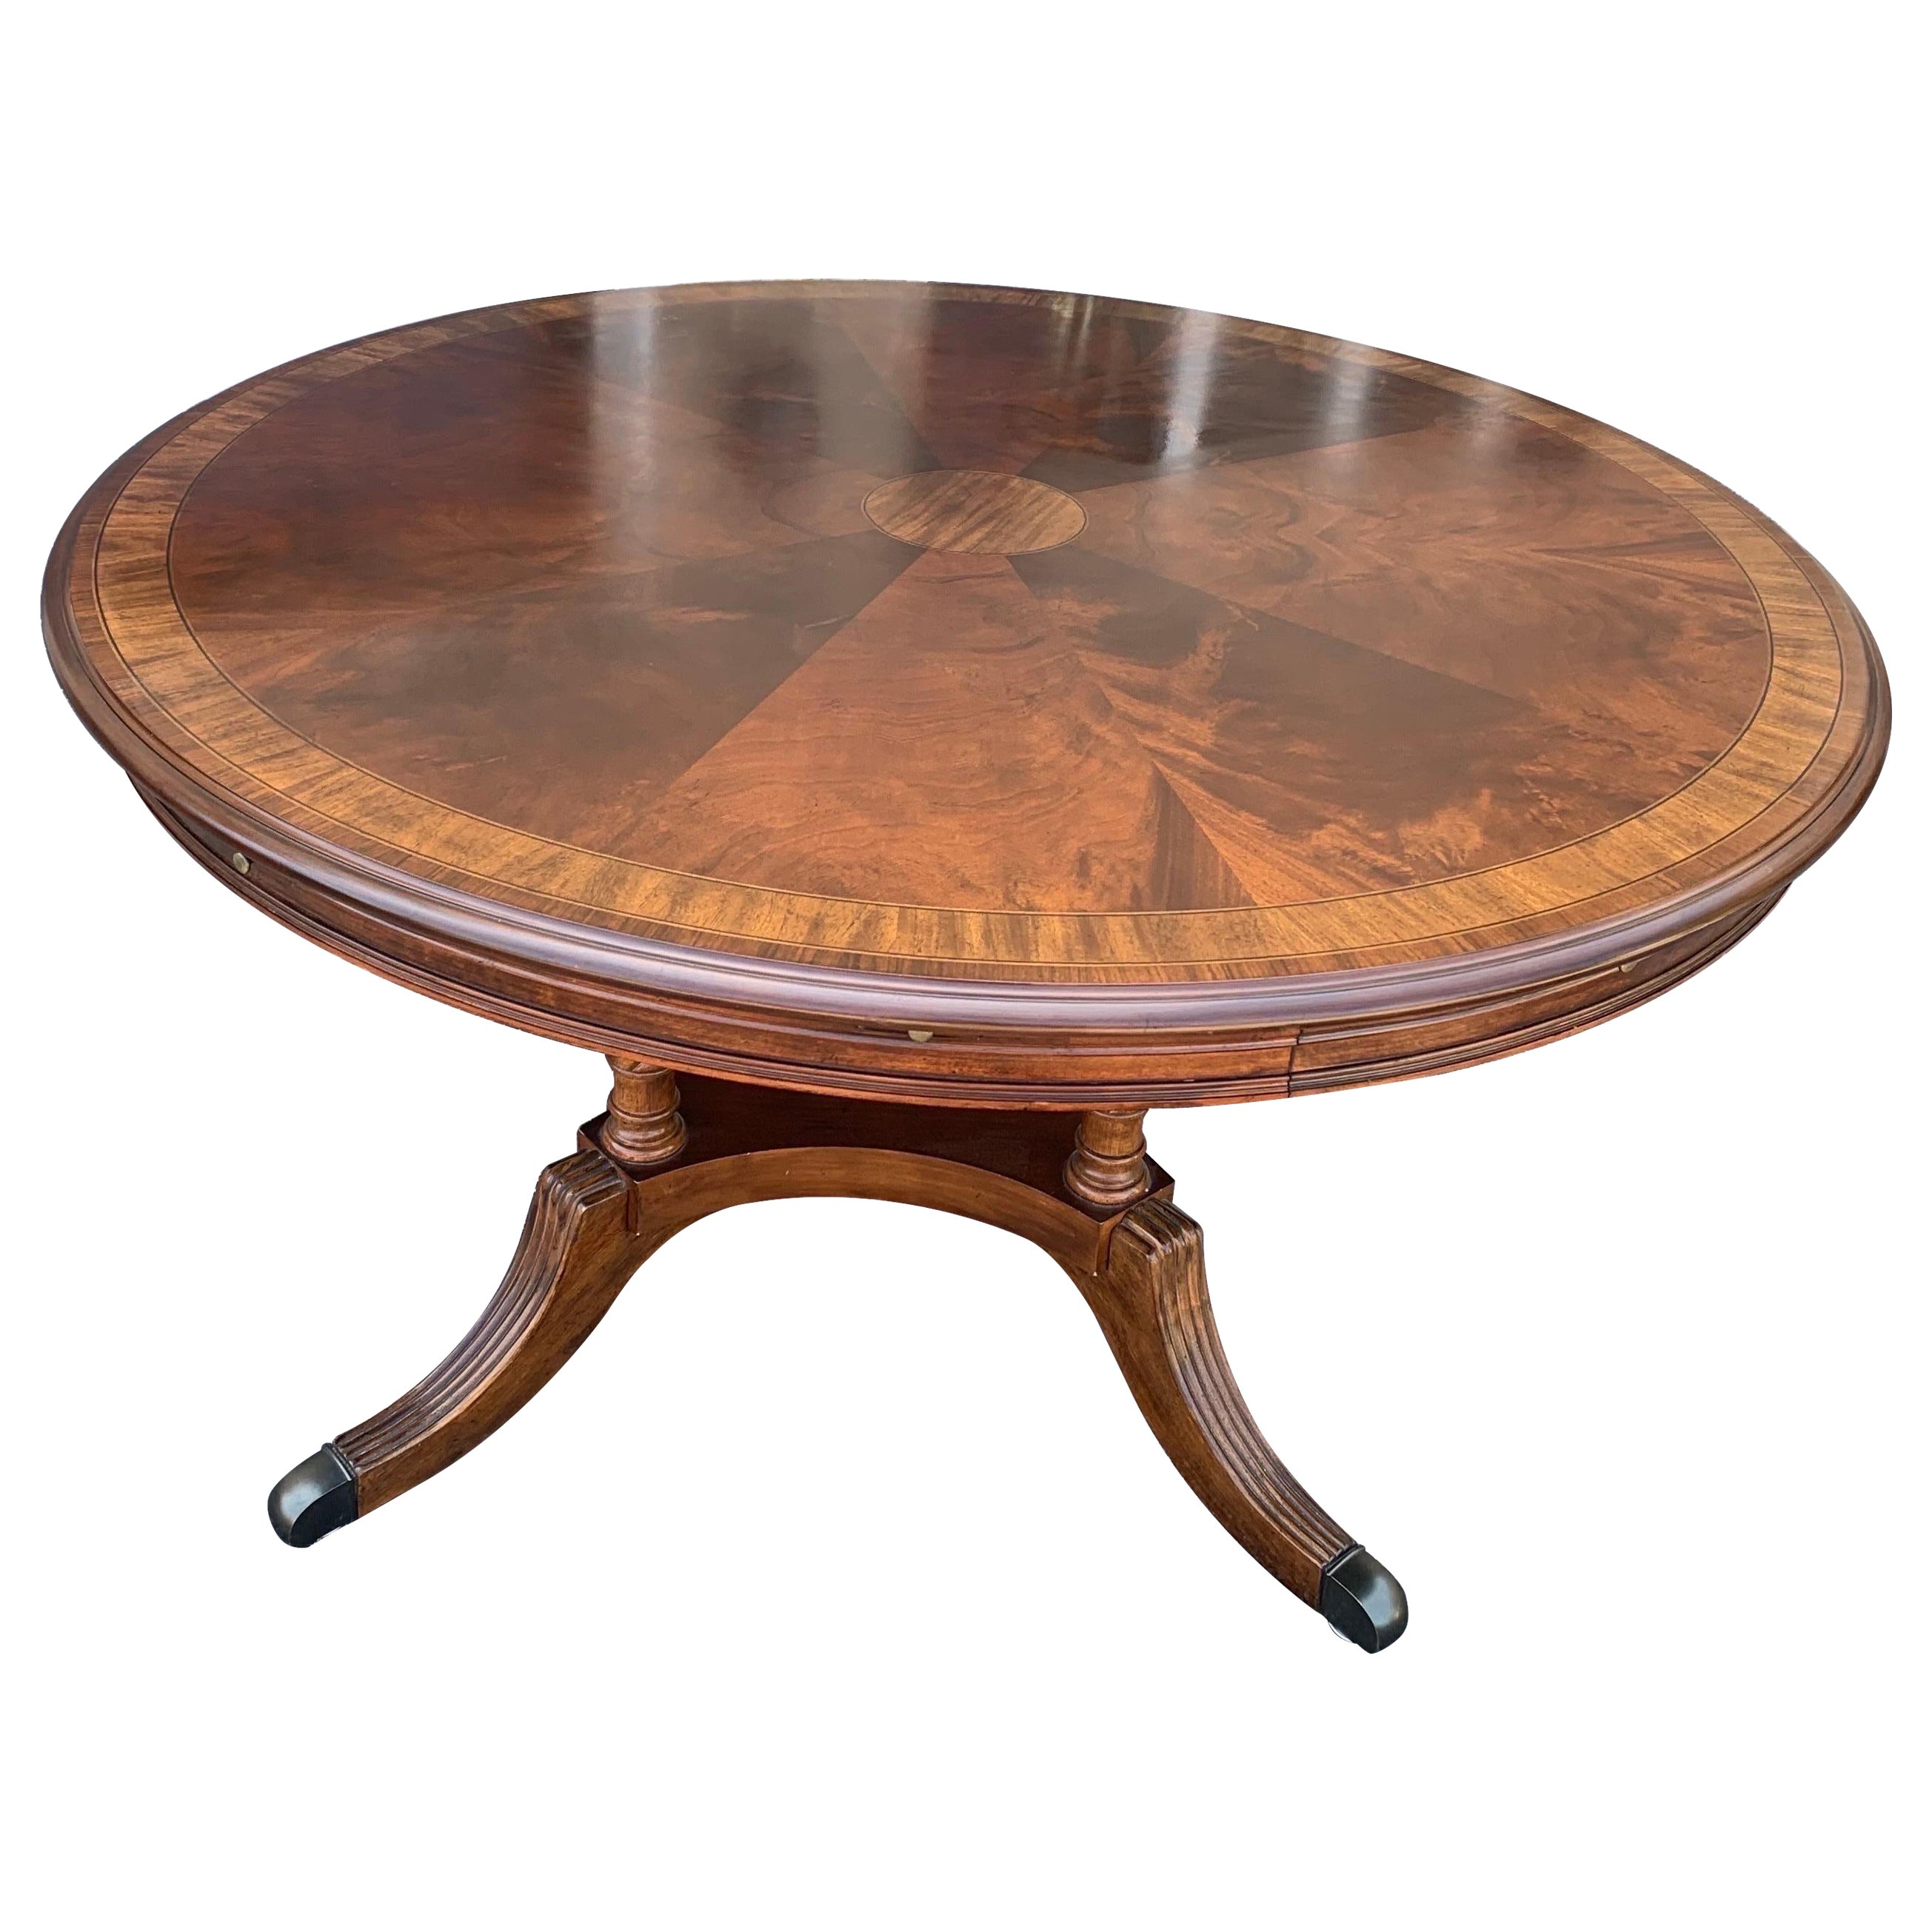 Mahogany Round Dining Table with Perimeter Leaves Oversized